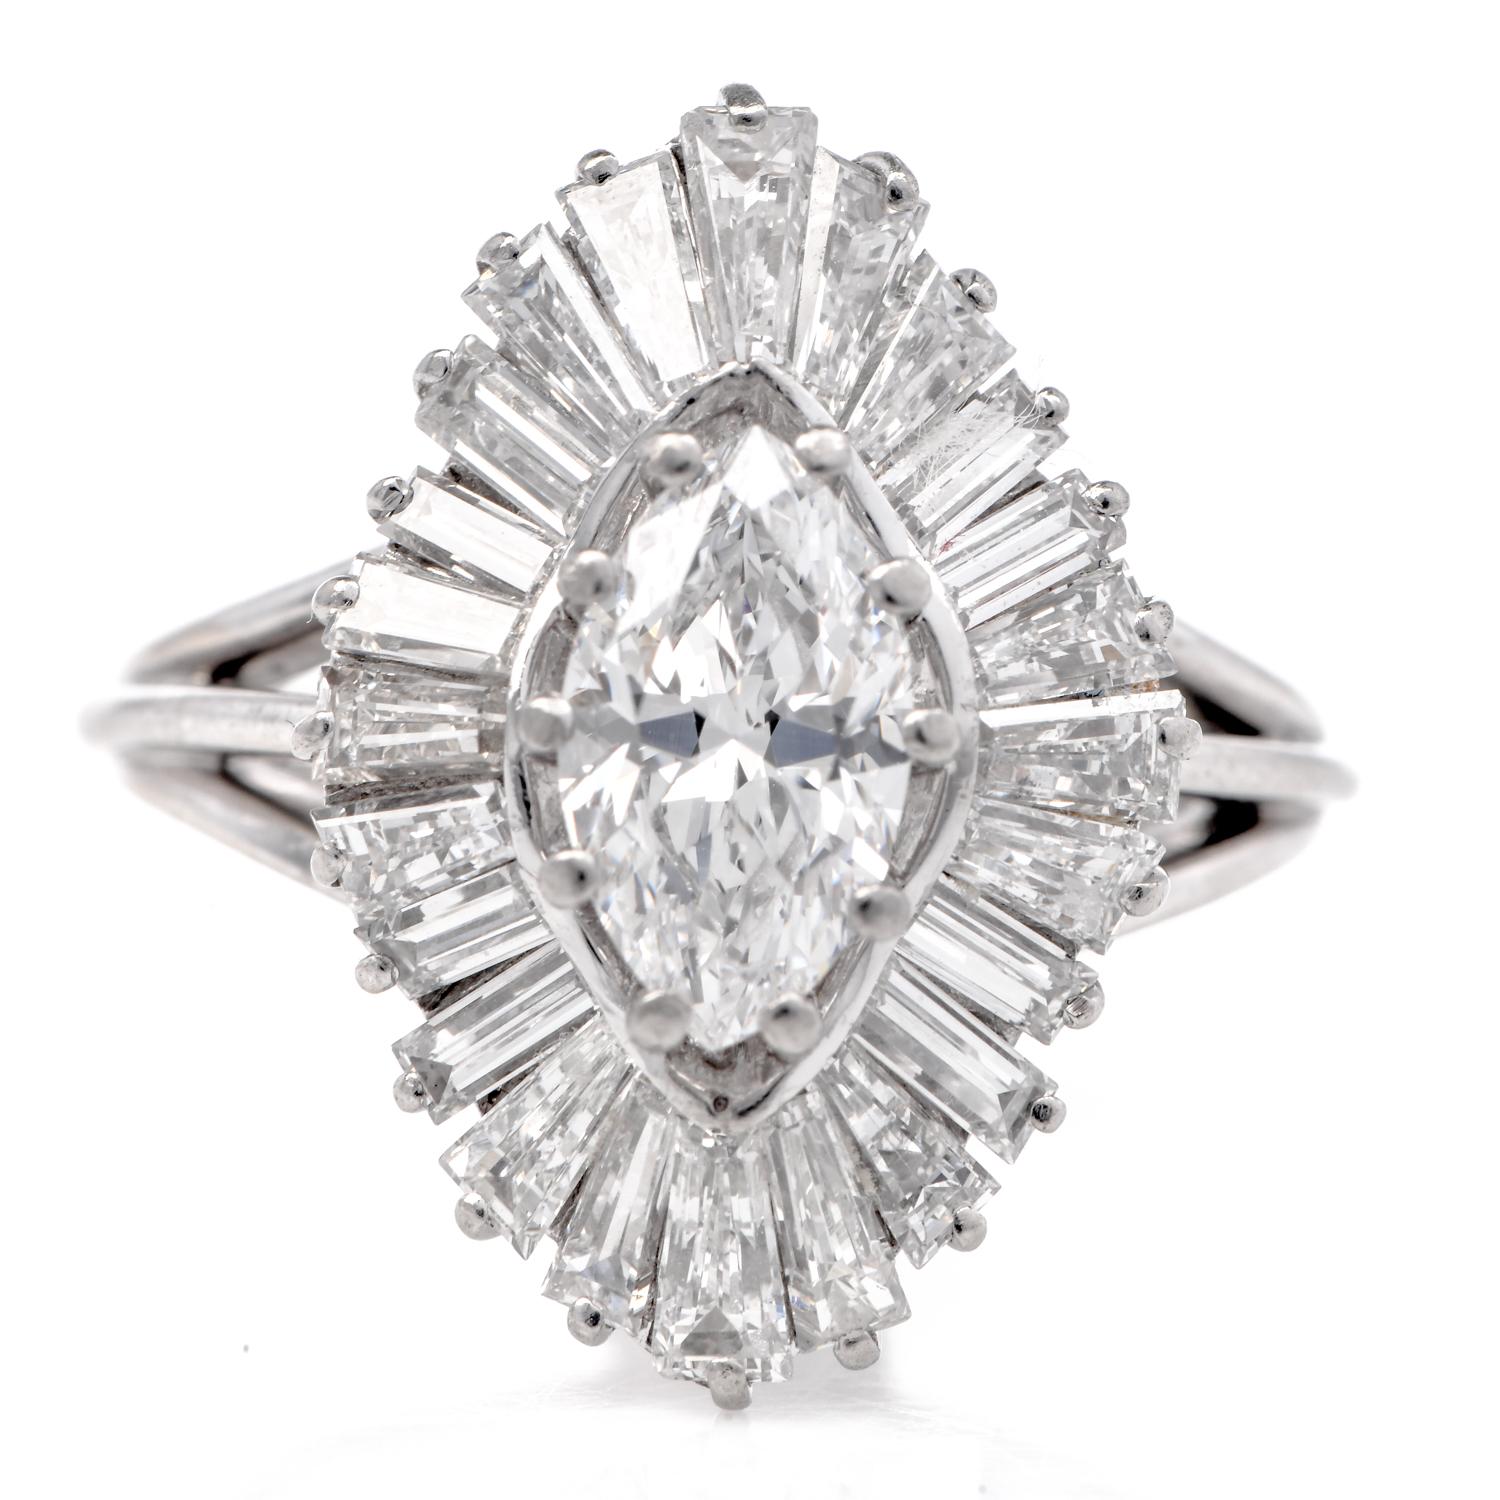 Presenting a beautiful Dimond Ballerina Style Cocktail Ring forged in Platinum. The diamonds are natural Marquise diamonds surrounded by Tapered baguette diamonds around the center.

Metal: Platinum

Centre  Diamond: Marquise cut approximately 1.30